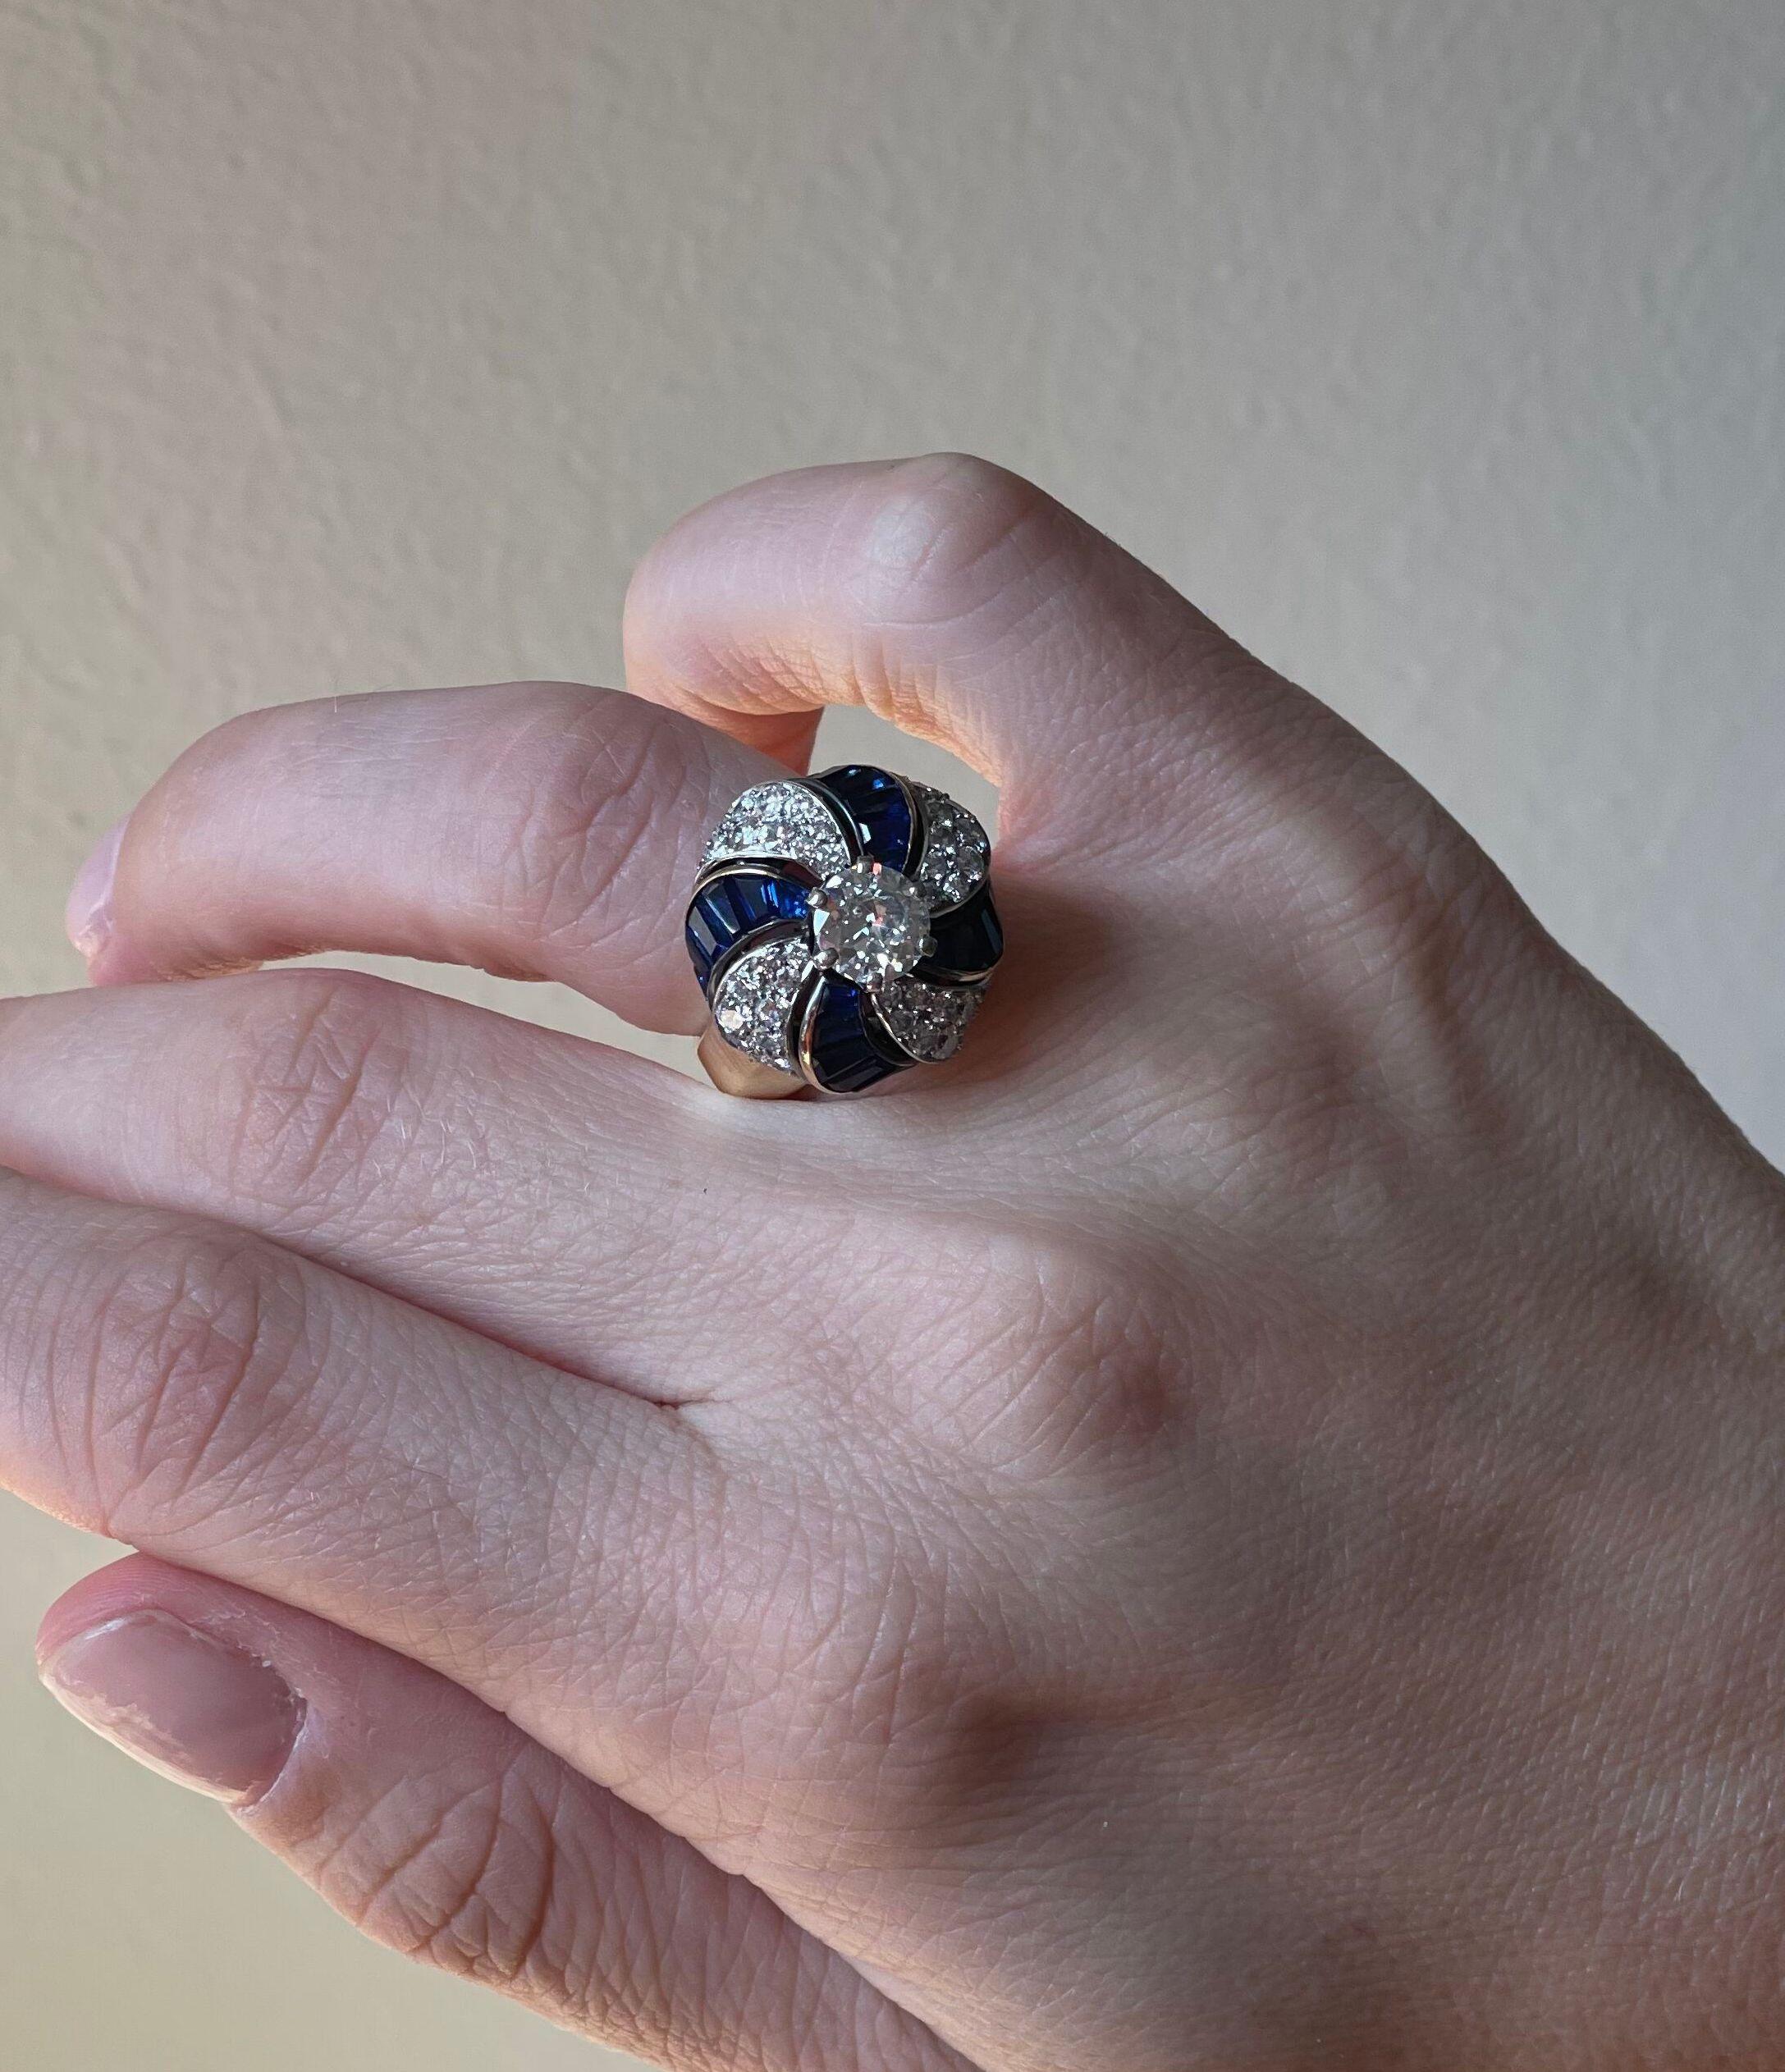 Beautiful and special 18k gold cocktail ring by Van Cleef & Arpels, featuring vibrant blue sapphires and approx. 2.20ctw in FG/VVS diamonds (center stone is approx. 1.10ct). Ring size 4.75, top is 0.75